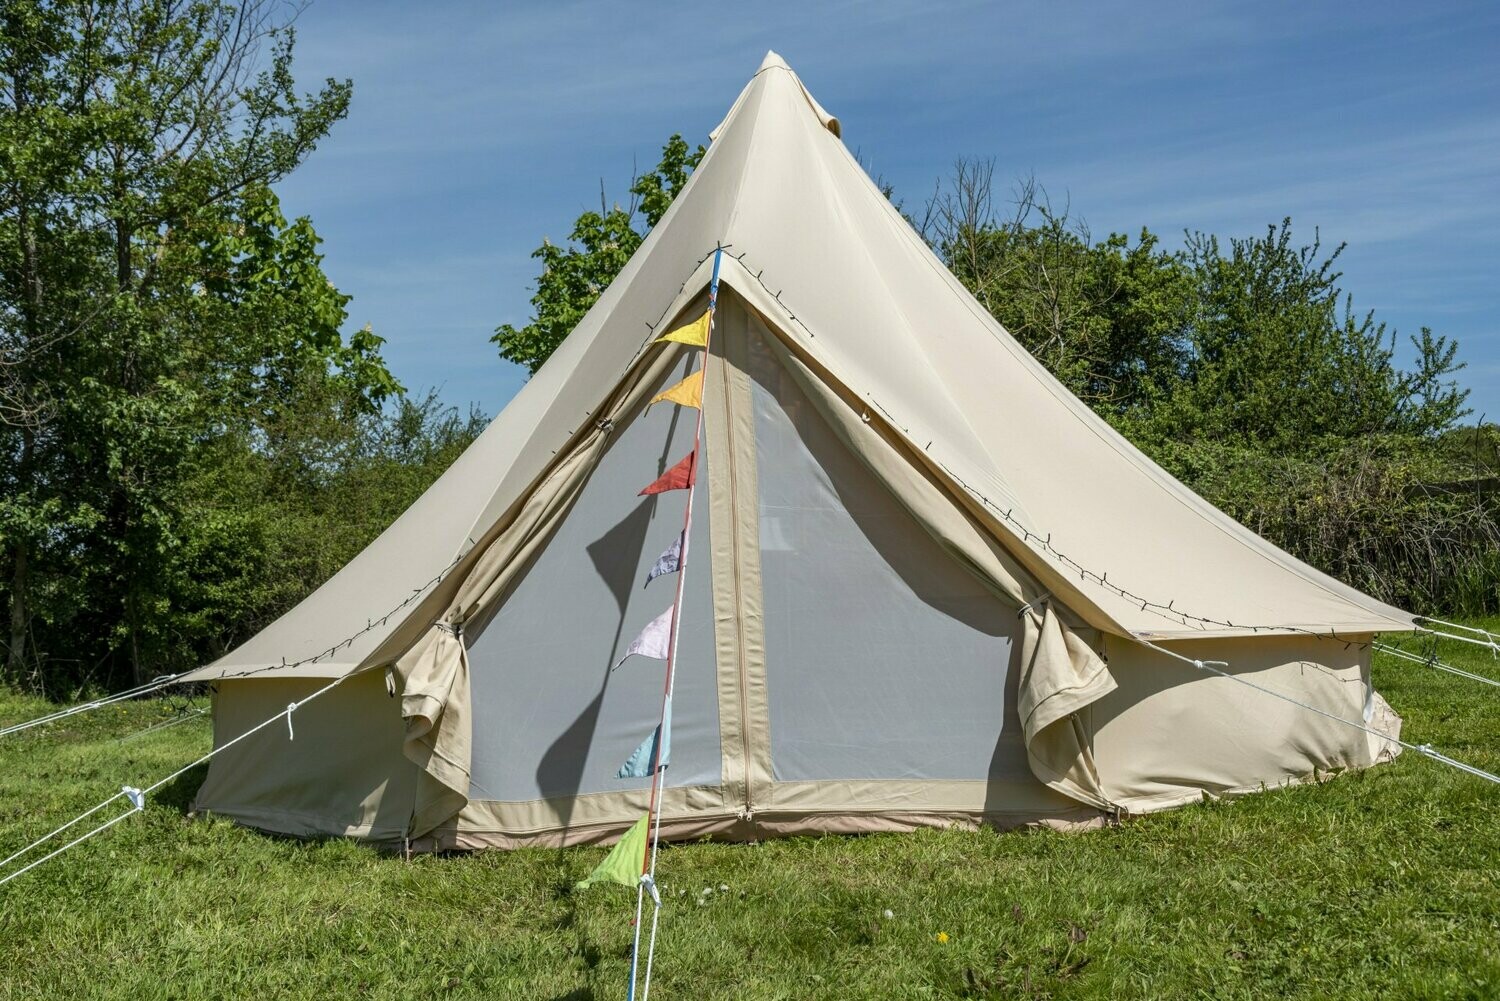 Used once! 4m Ultimate cotton canvas 320gsm bell tent. Fire retardant BS7837, secondary fly door, zipped in groundsheet. Perfect for Spring/Summer/Autumn camping!